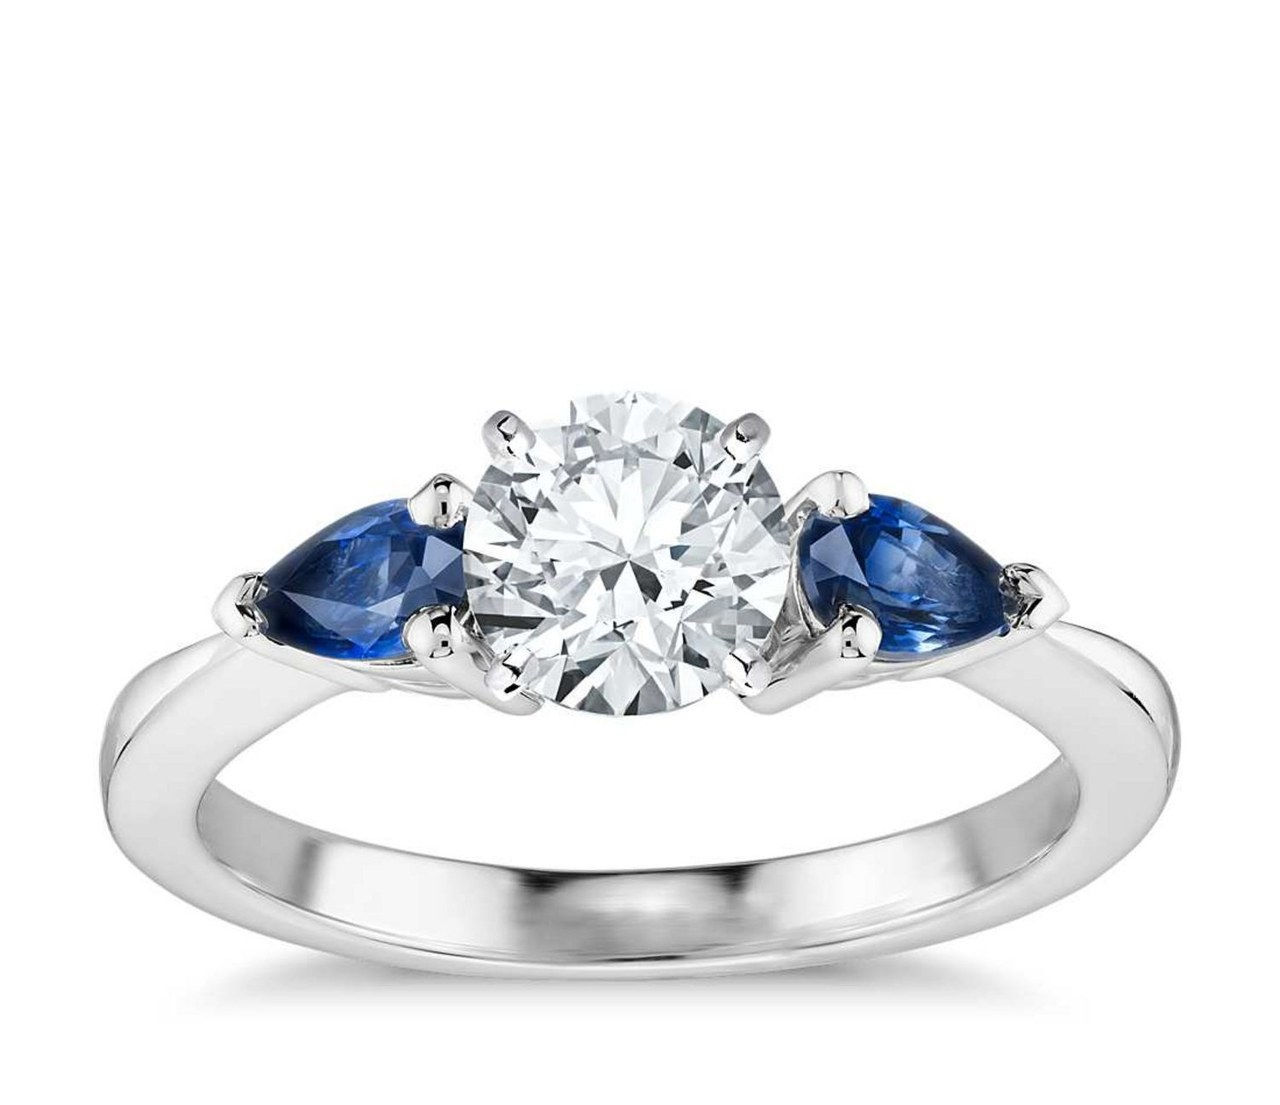 3 best new engagement rings trends 2015 0108 courtesy